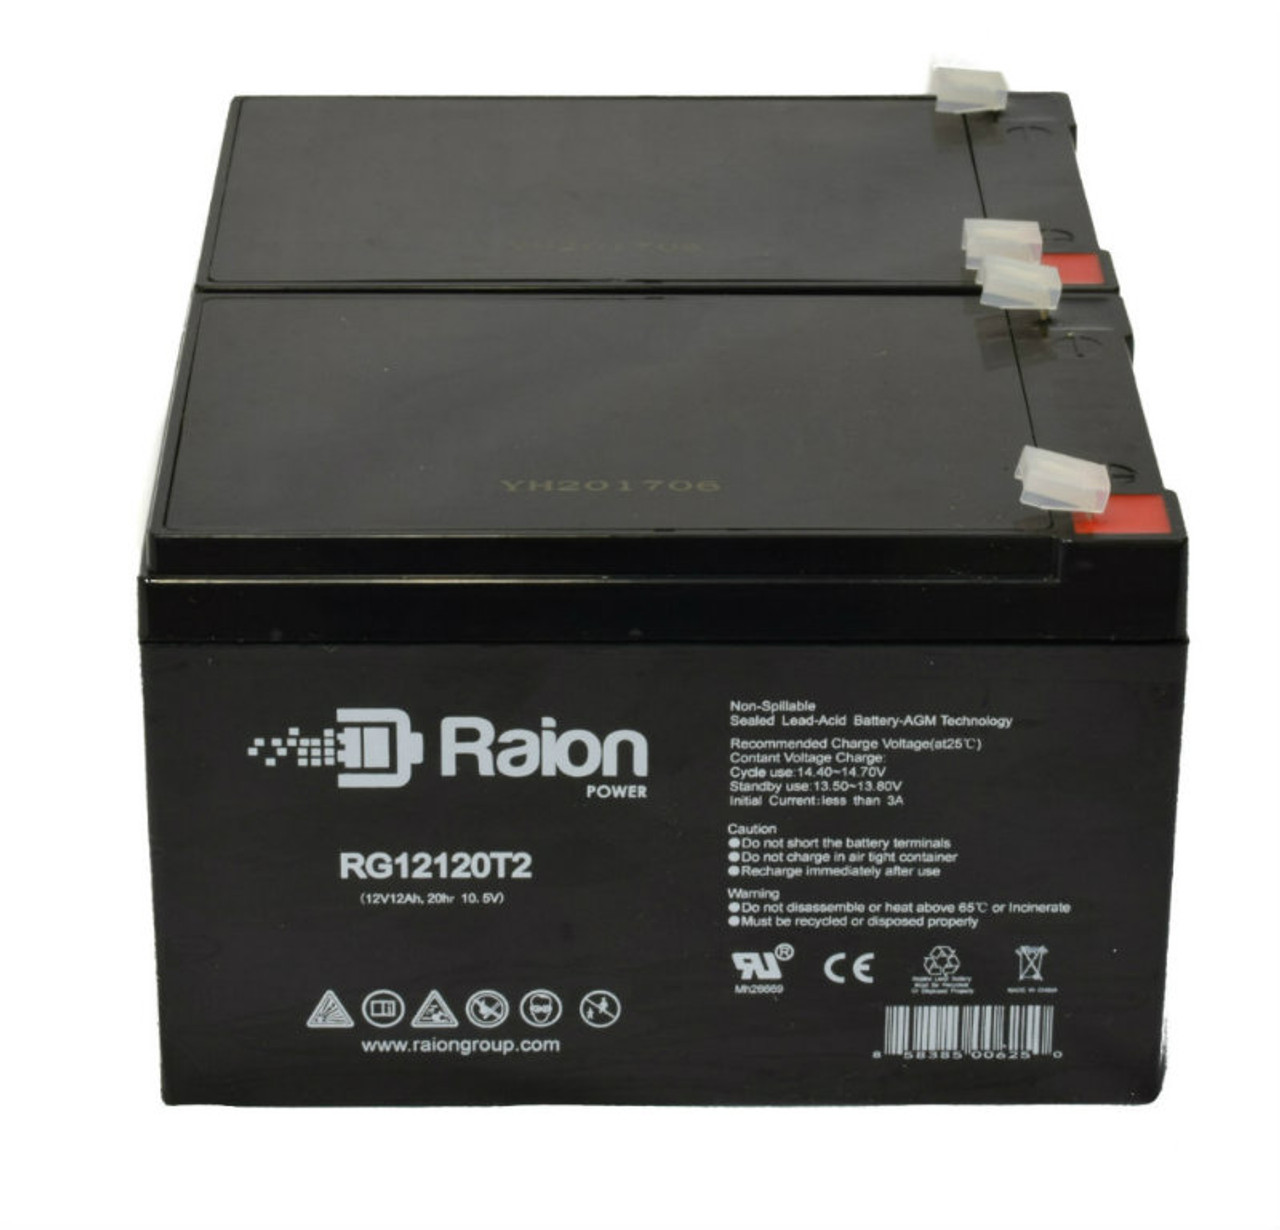 Raion Power 12V 12Ah Non-Spillable Compatible Replacement Battery for EverExceed AM12-14 - (2 Pack)